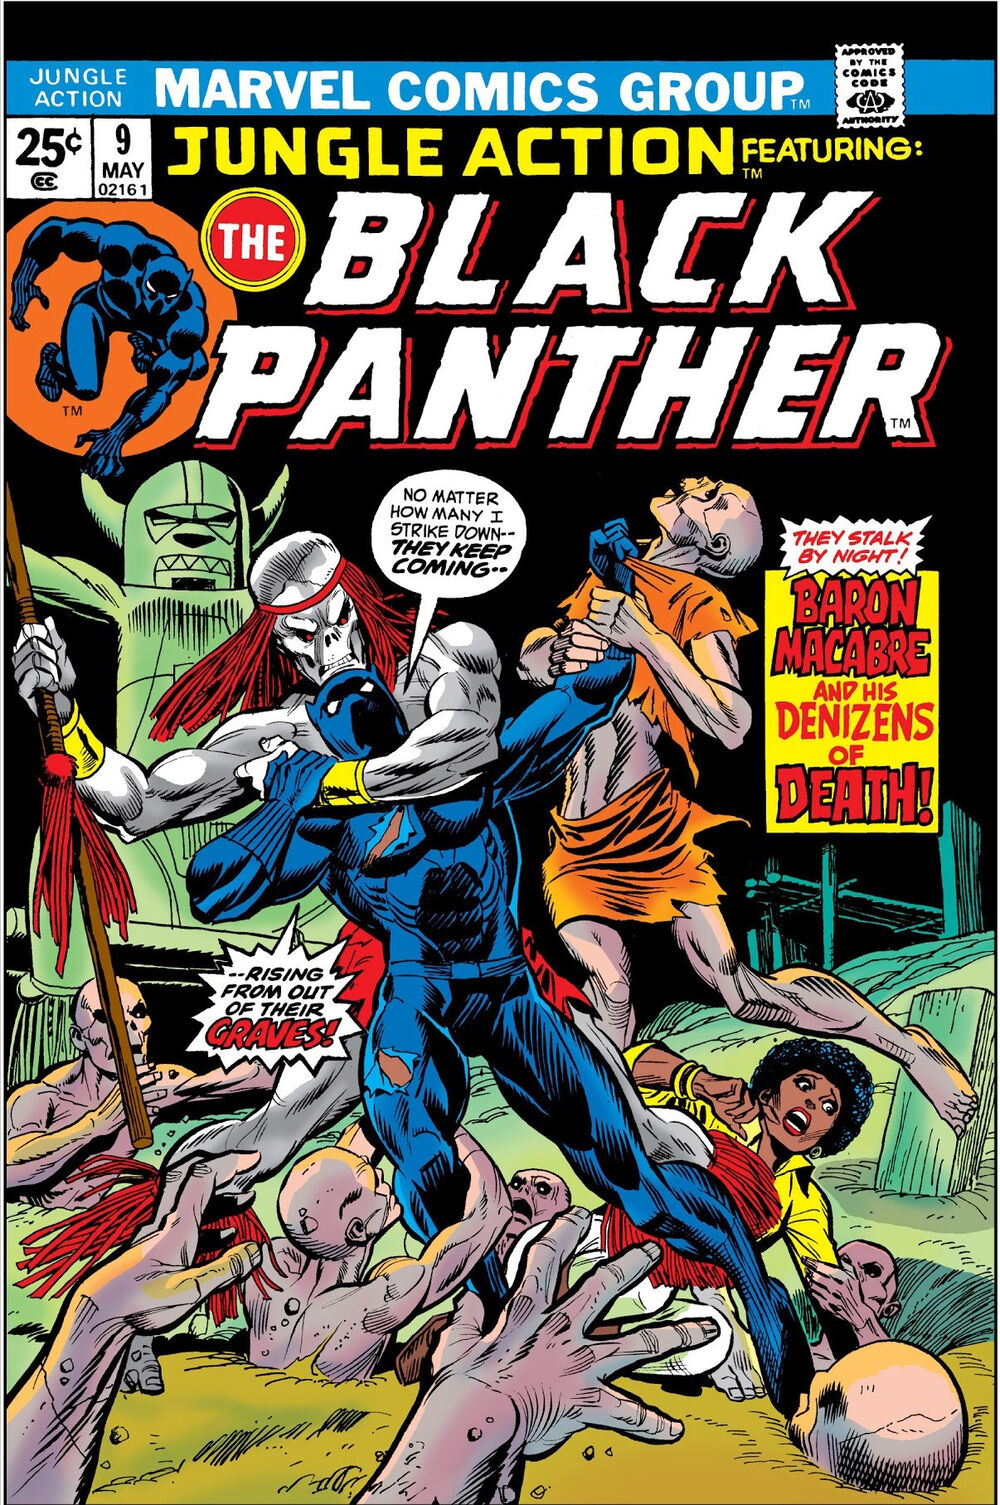 Jungle Action Featuring The Black Panther Volume 2 #9